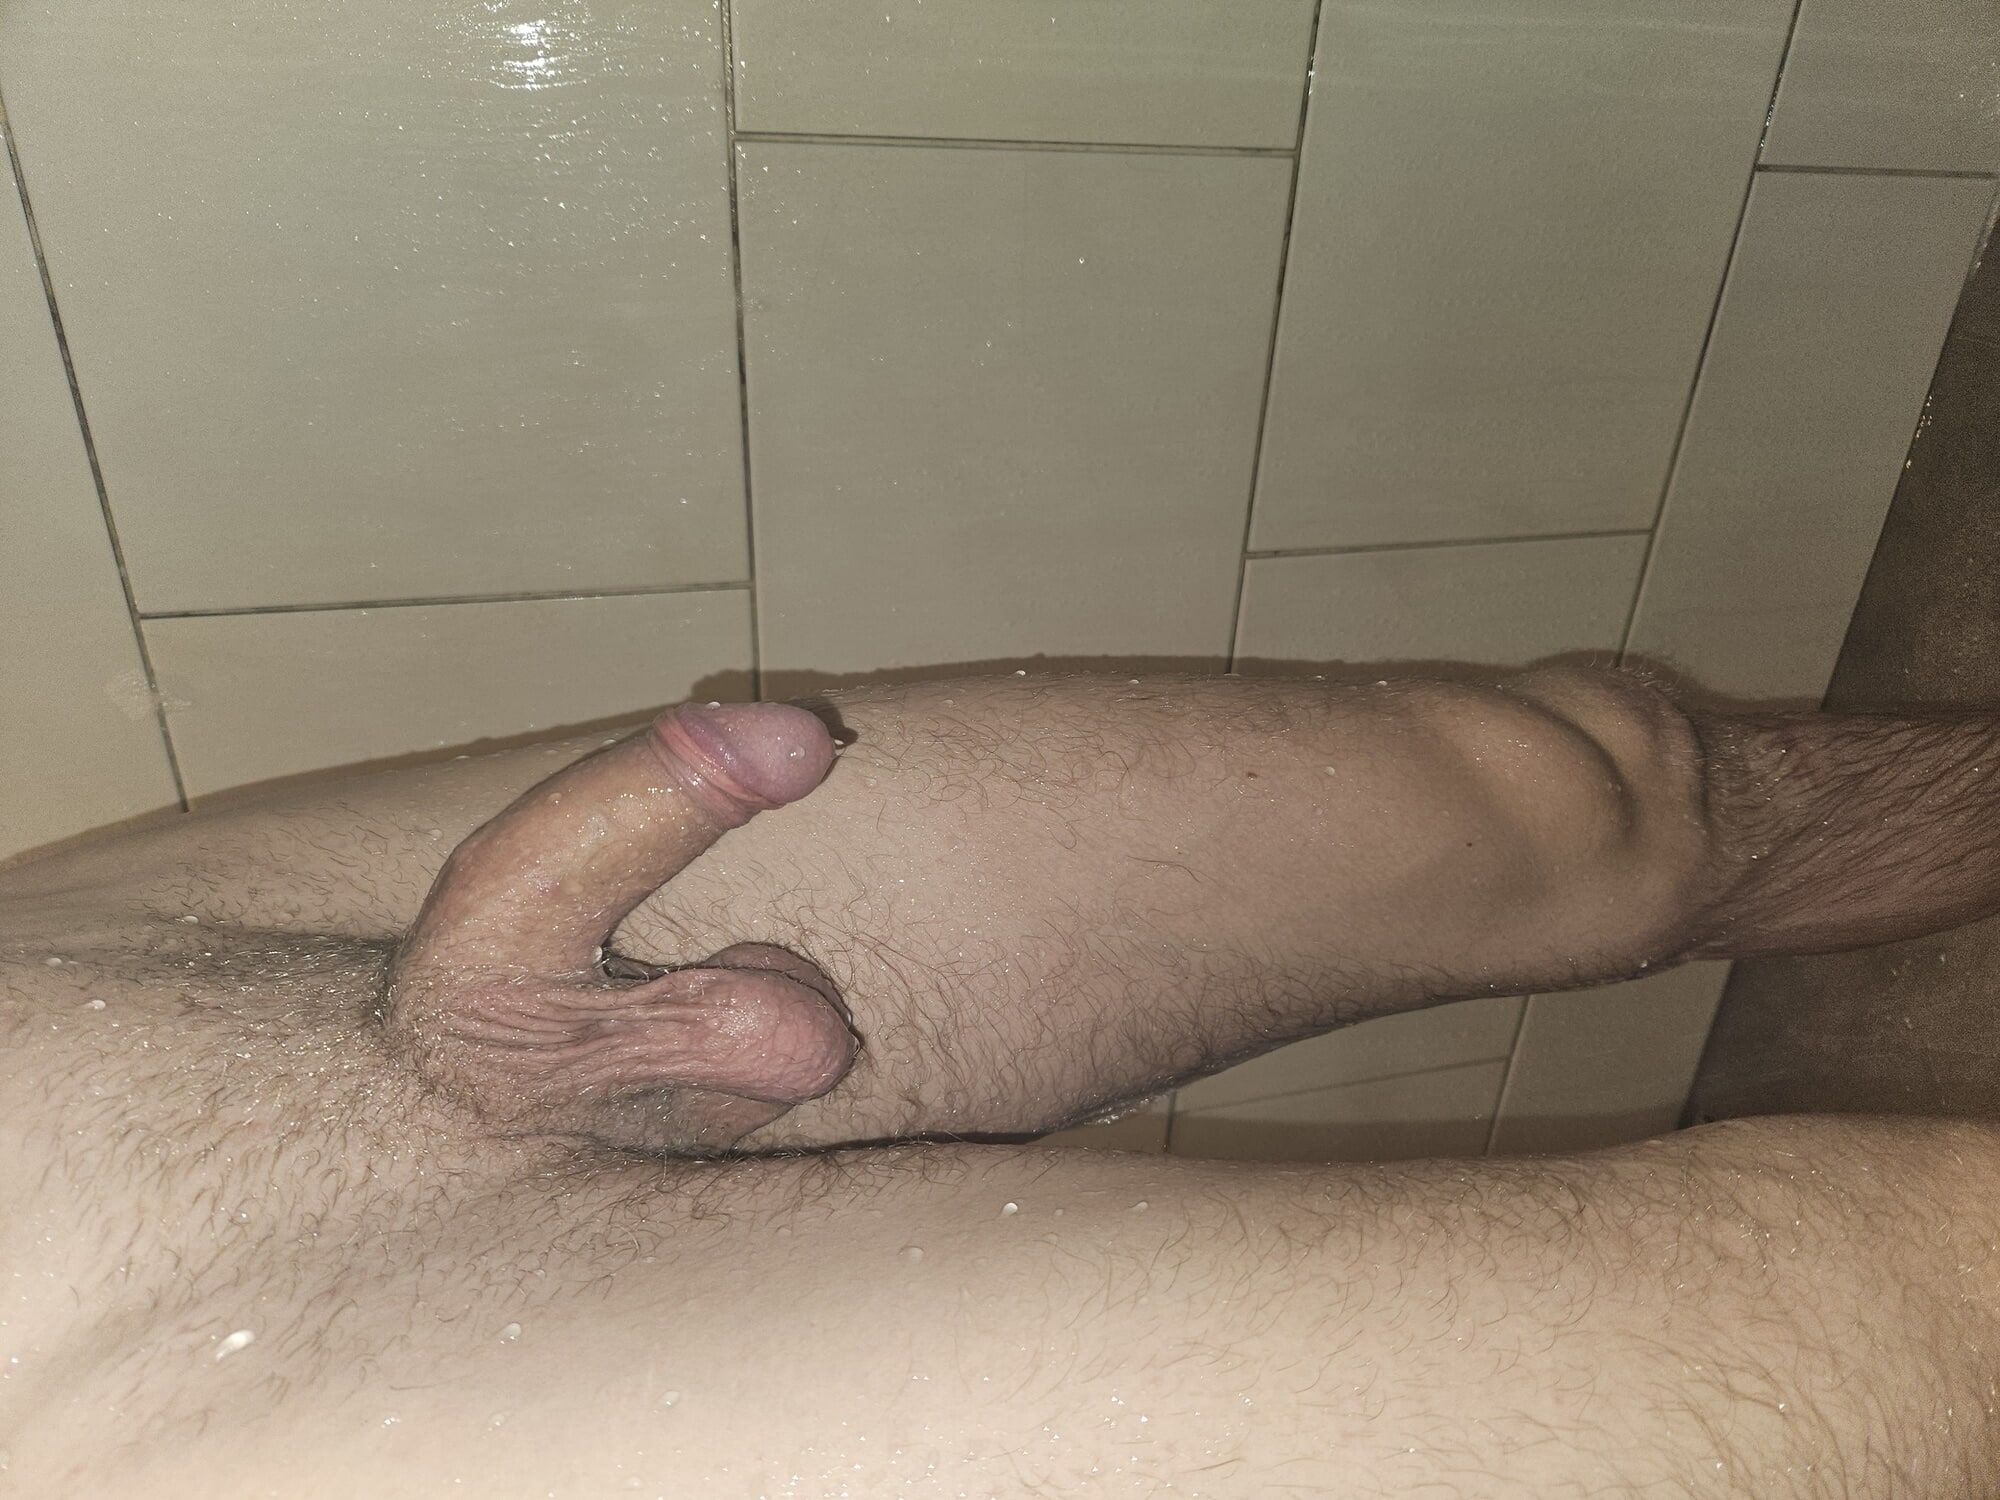 Limp cock in the shower #3